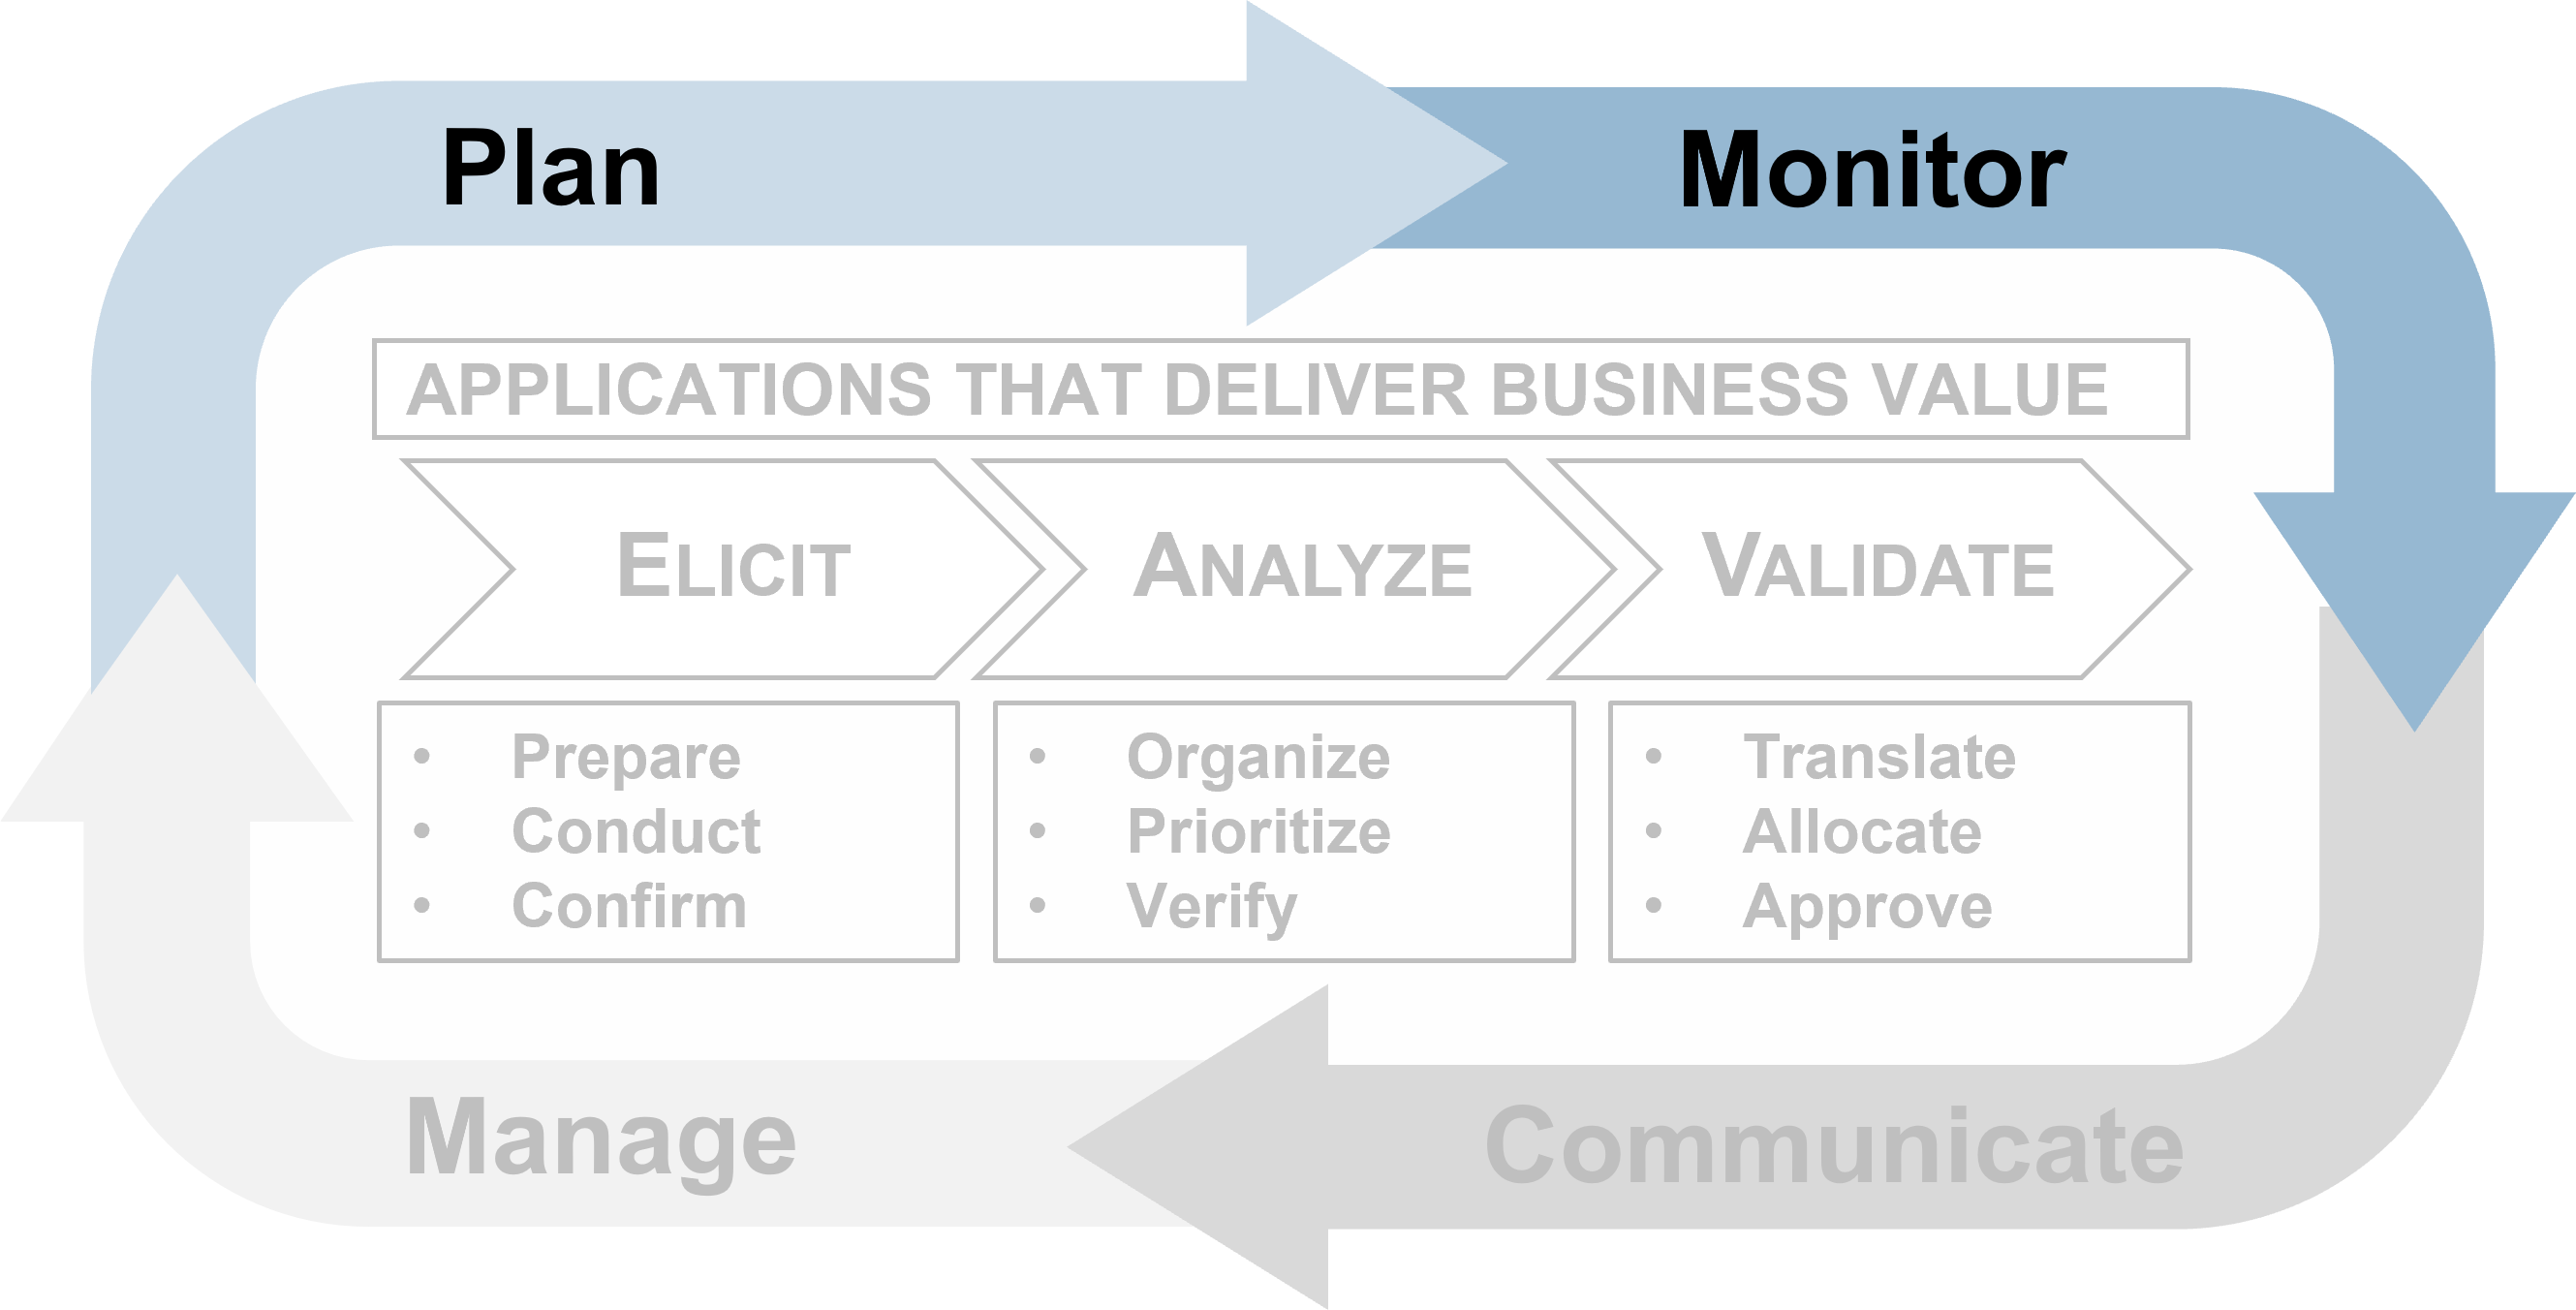 The image is the Requirements Gathering Framework from earlier slides, but with all parts of the graphic grey-out, except for the arrows containing Plan and Monitor, at the top.